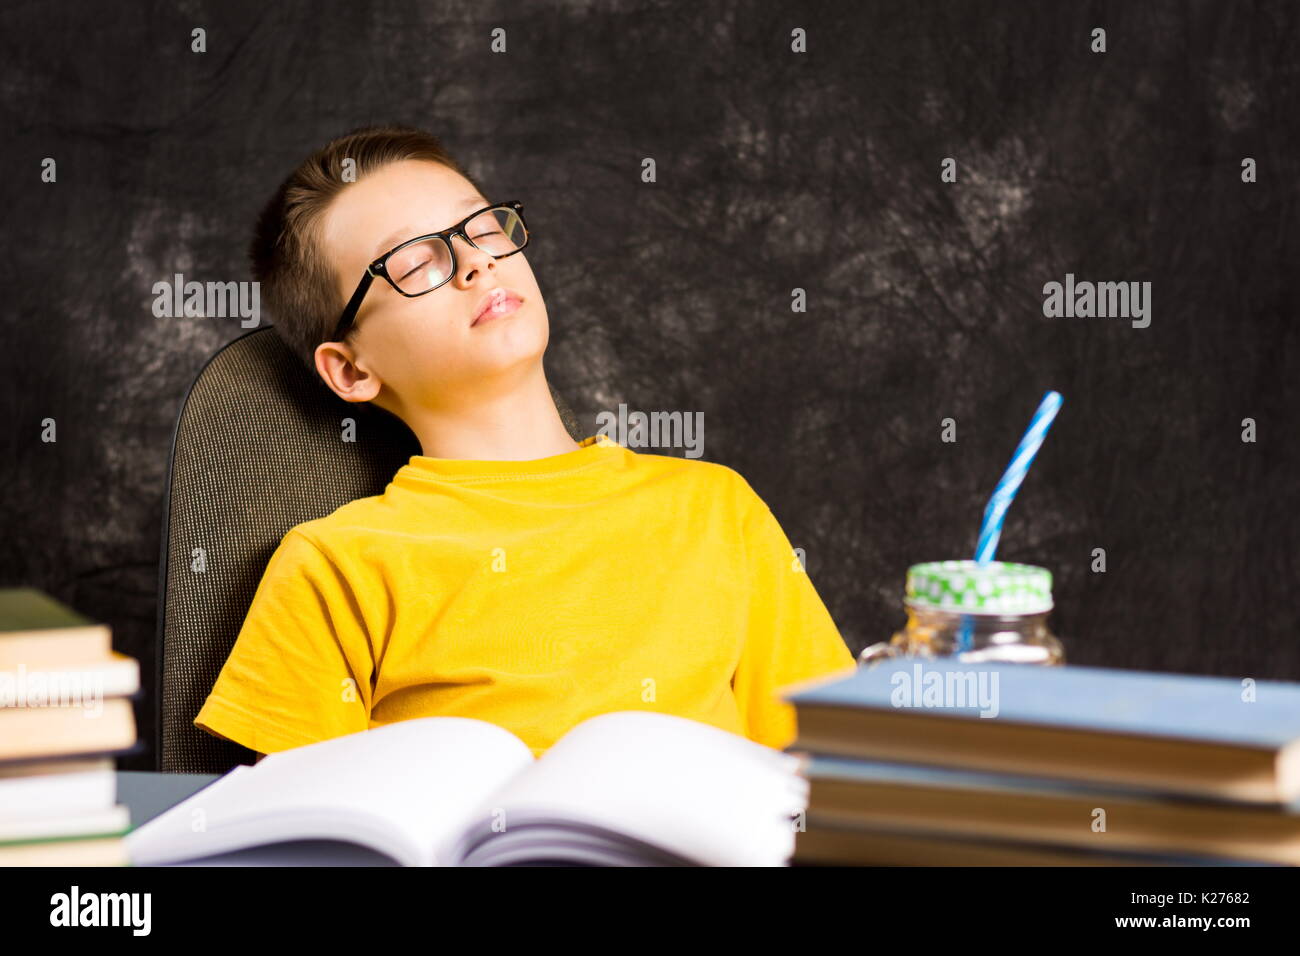 Boy taking a nap while finishing homework by the desk Stock Photo